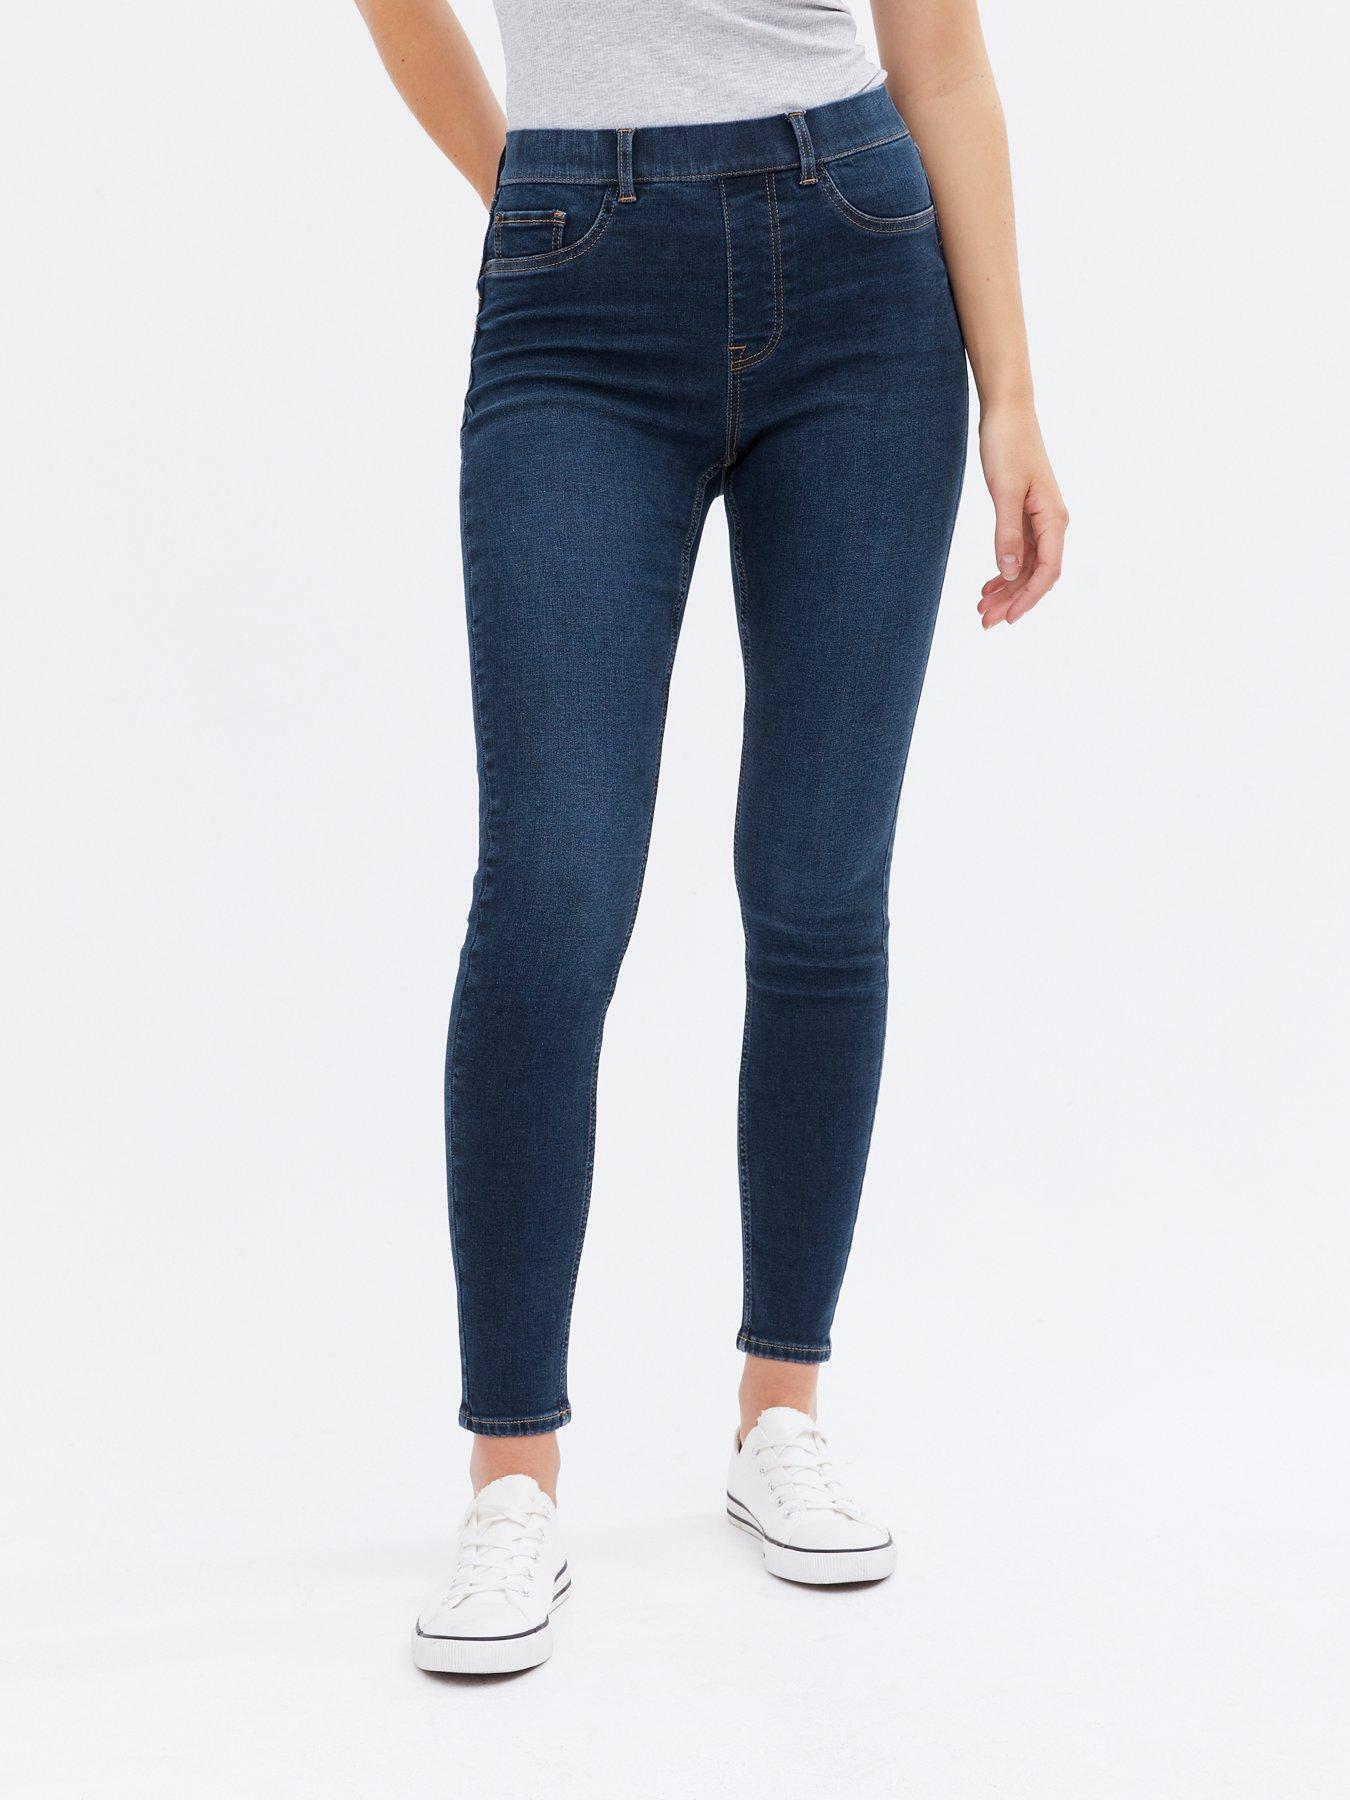 New Look Curve shaper jegging in mid blue